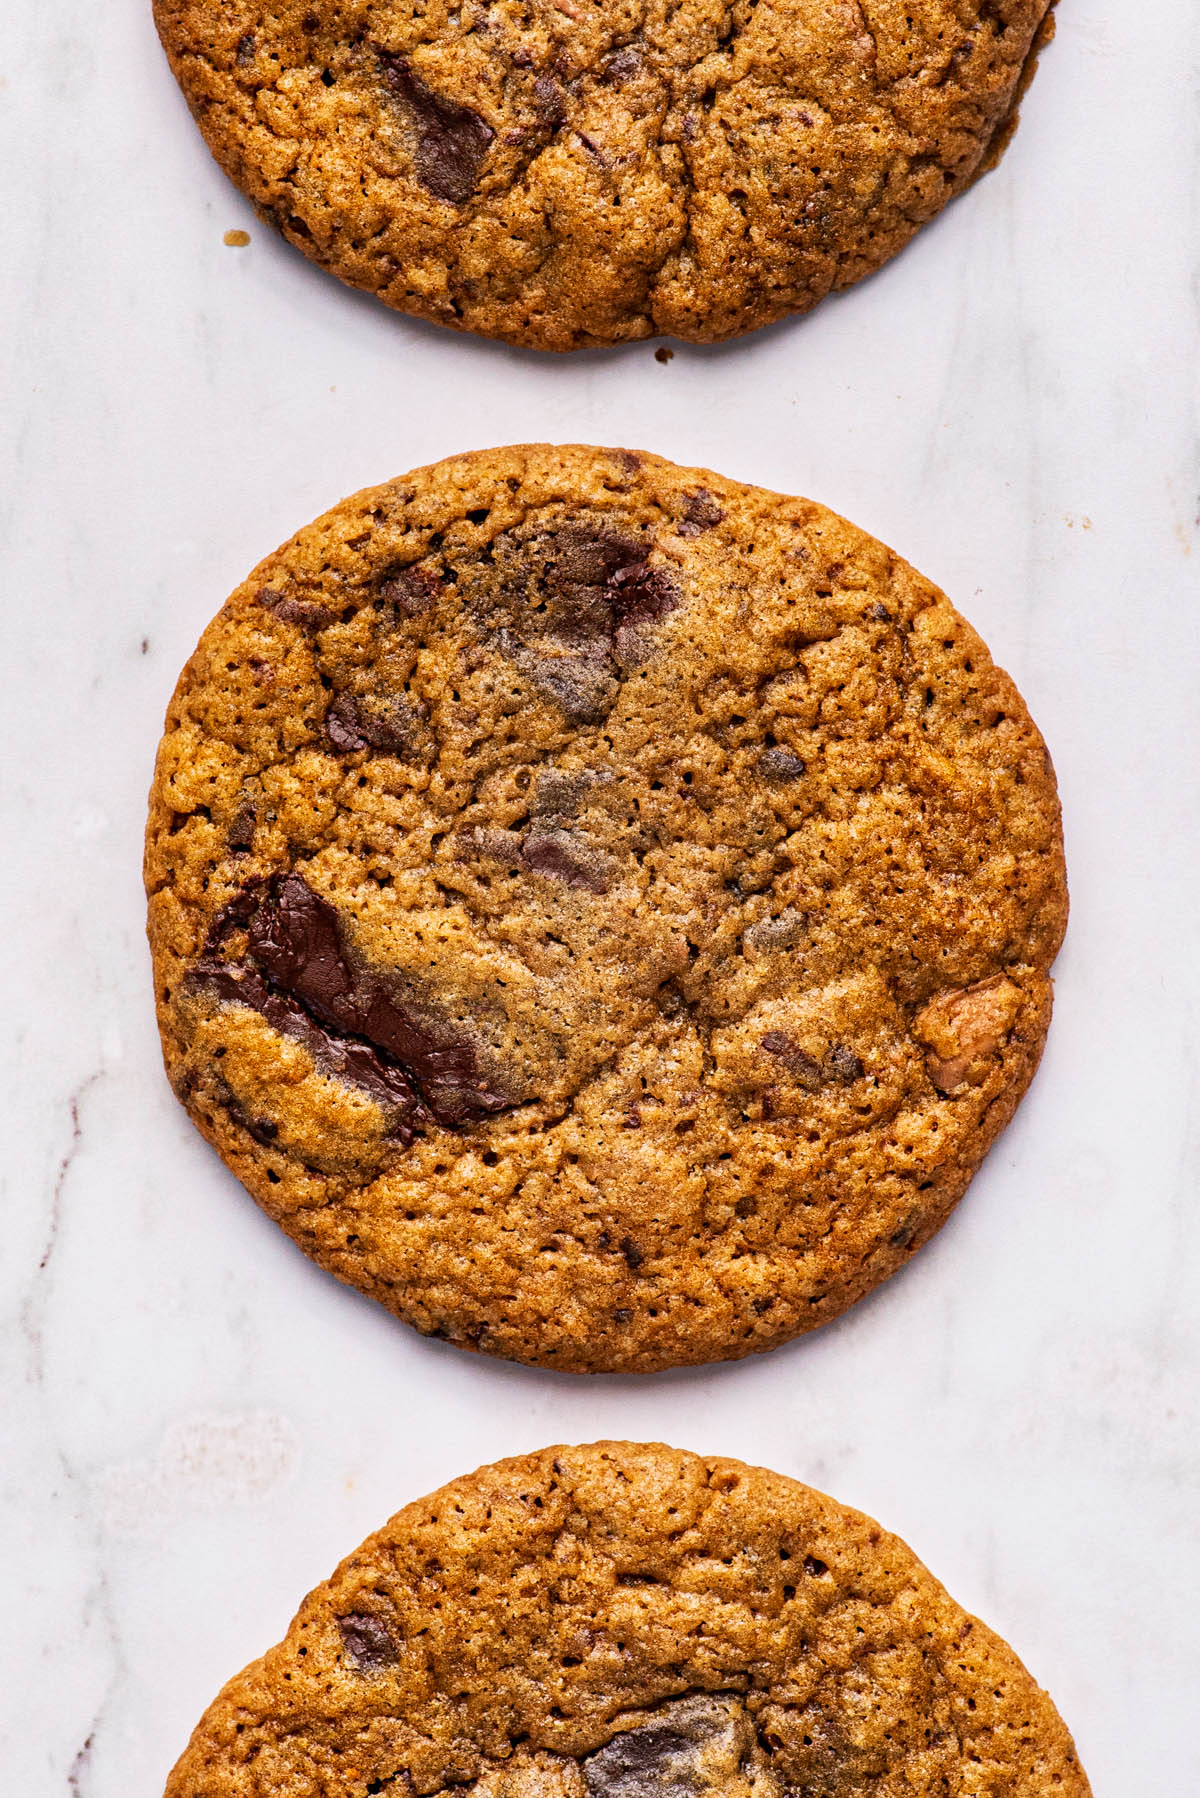 Three large chocolate chunk cookies arranged in a row.